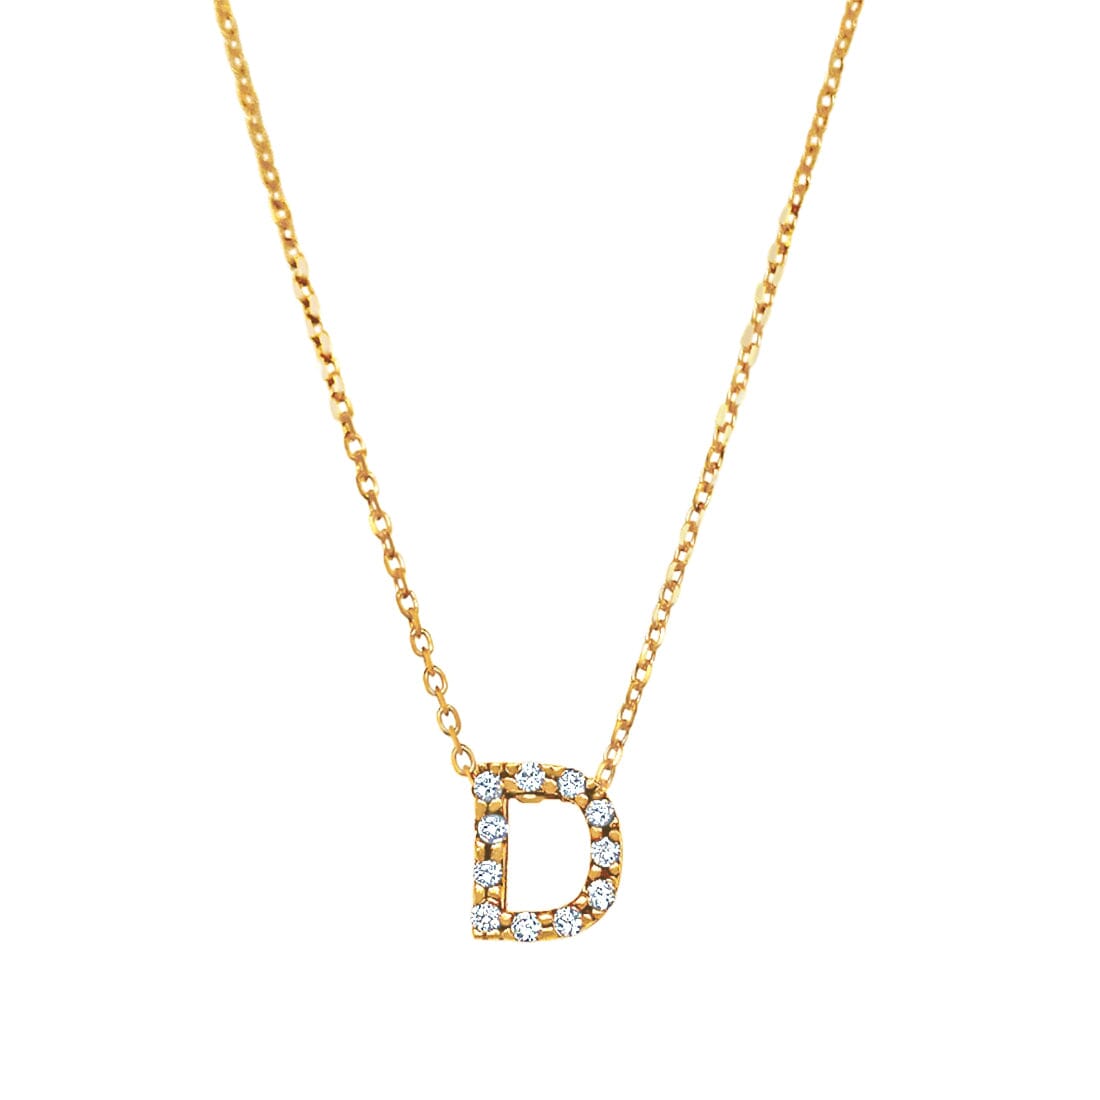 9ct Yellow Gold Silver Infused Cubic Zirconia Initial Necklace Necklaces Bevilles D 